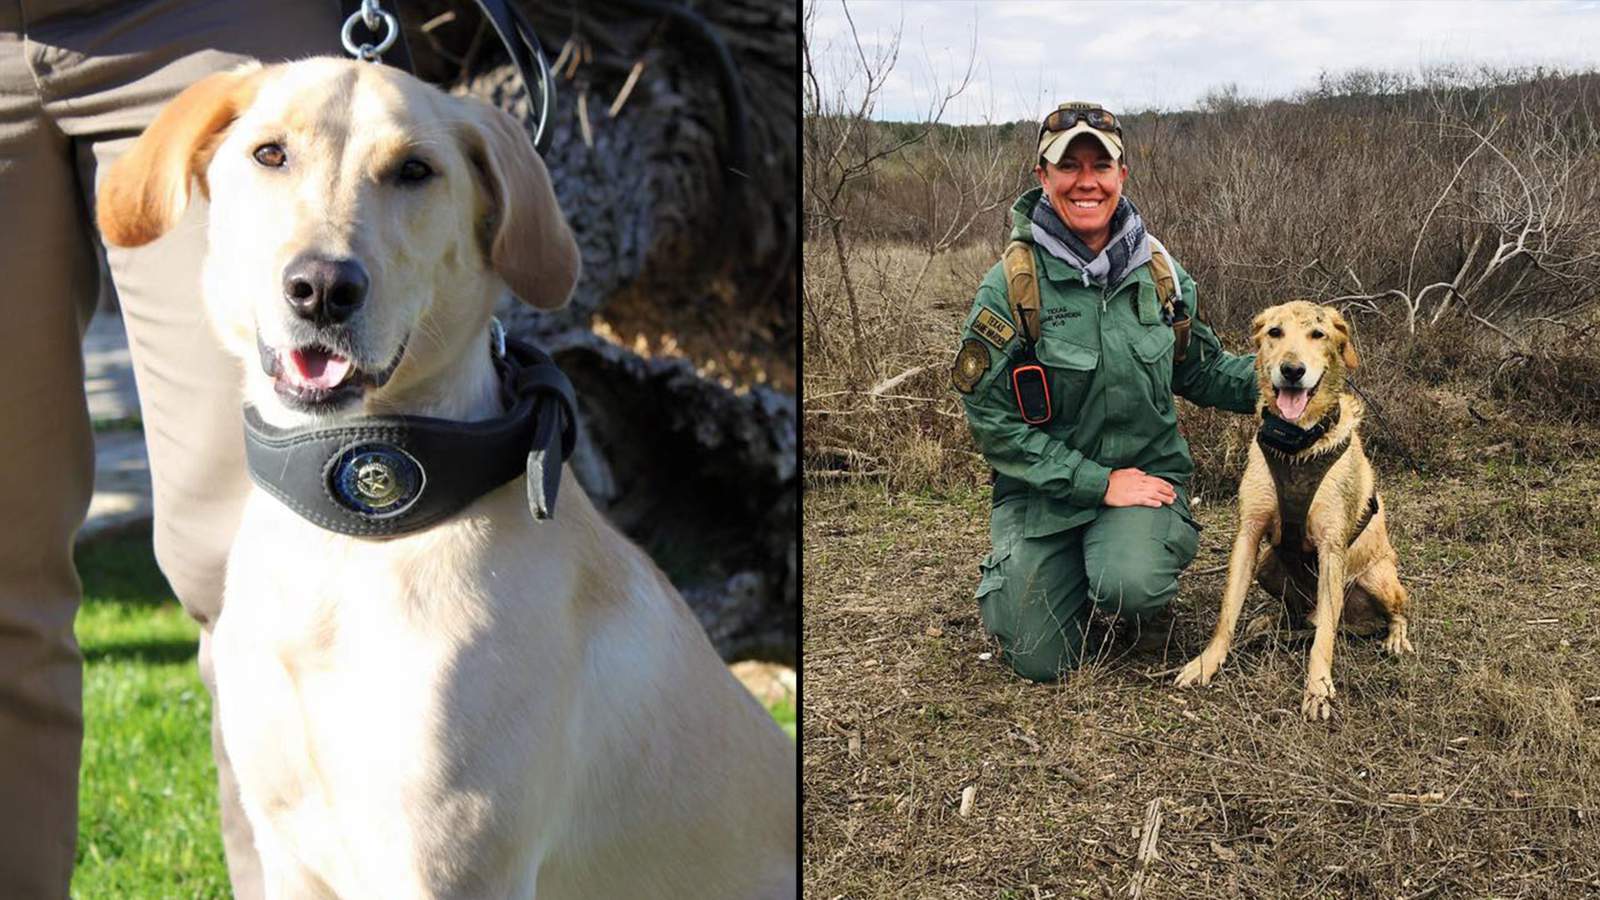 Texas Game Warden K9 retires from service after 7 years of service